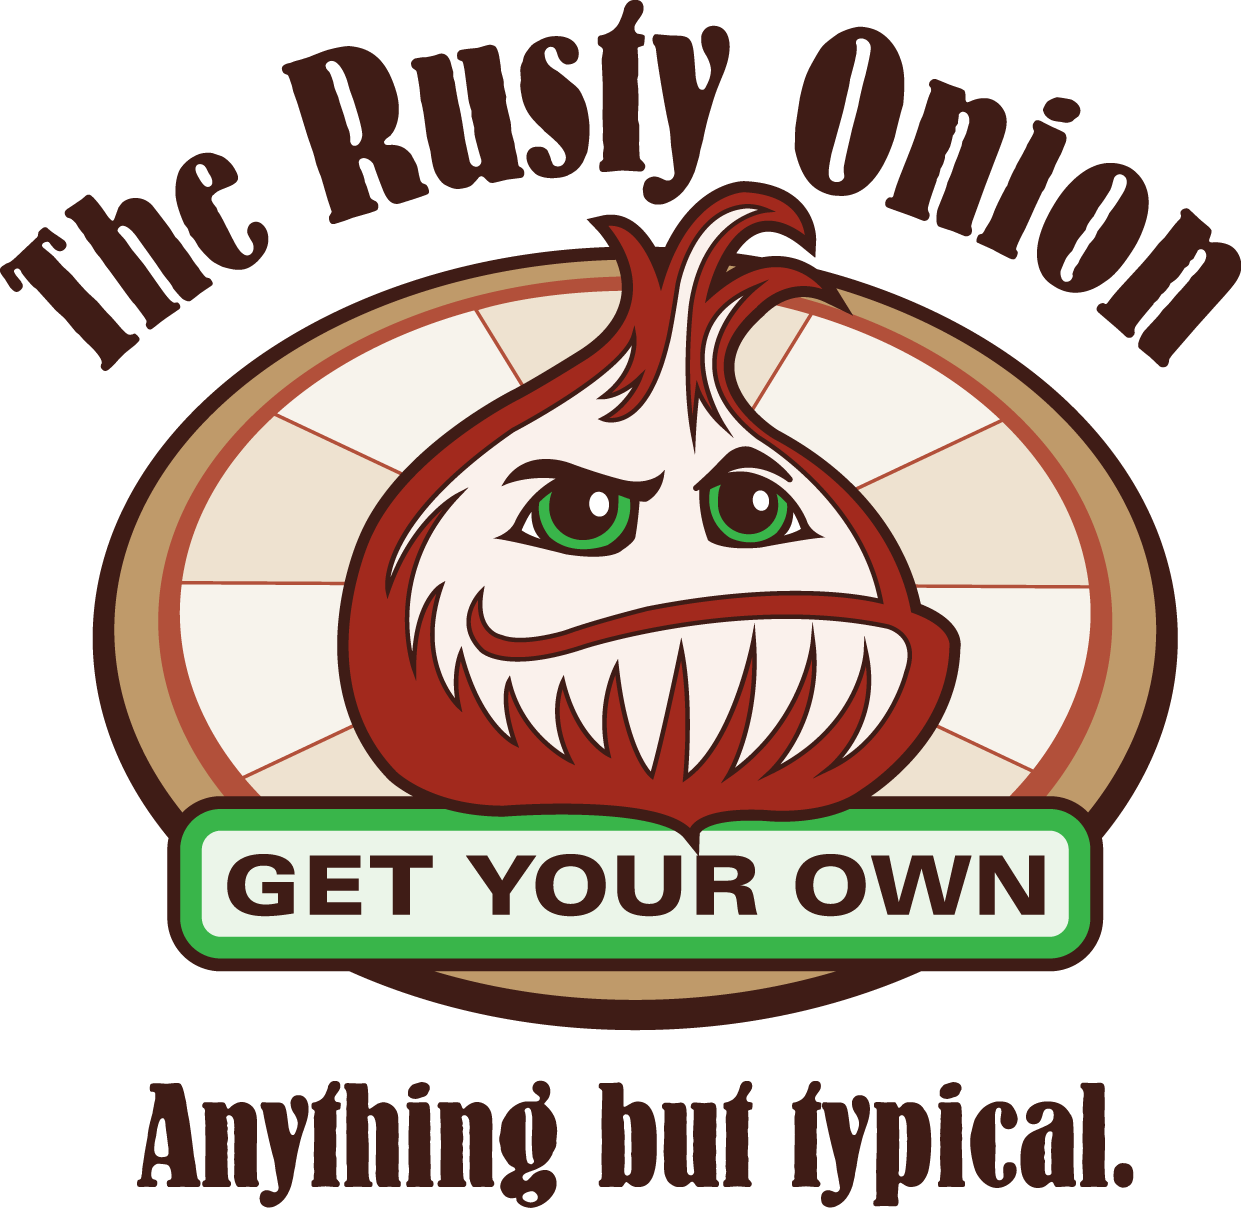 An illustated, personified onion with a mischievious expression positioned in front of a sunburst pattern that references a pizza surrounded by the words The Rusty Onion – get your own